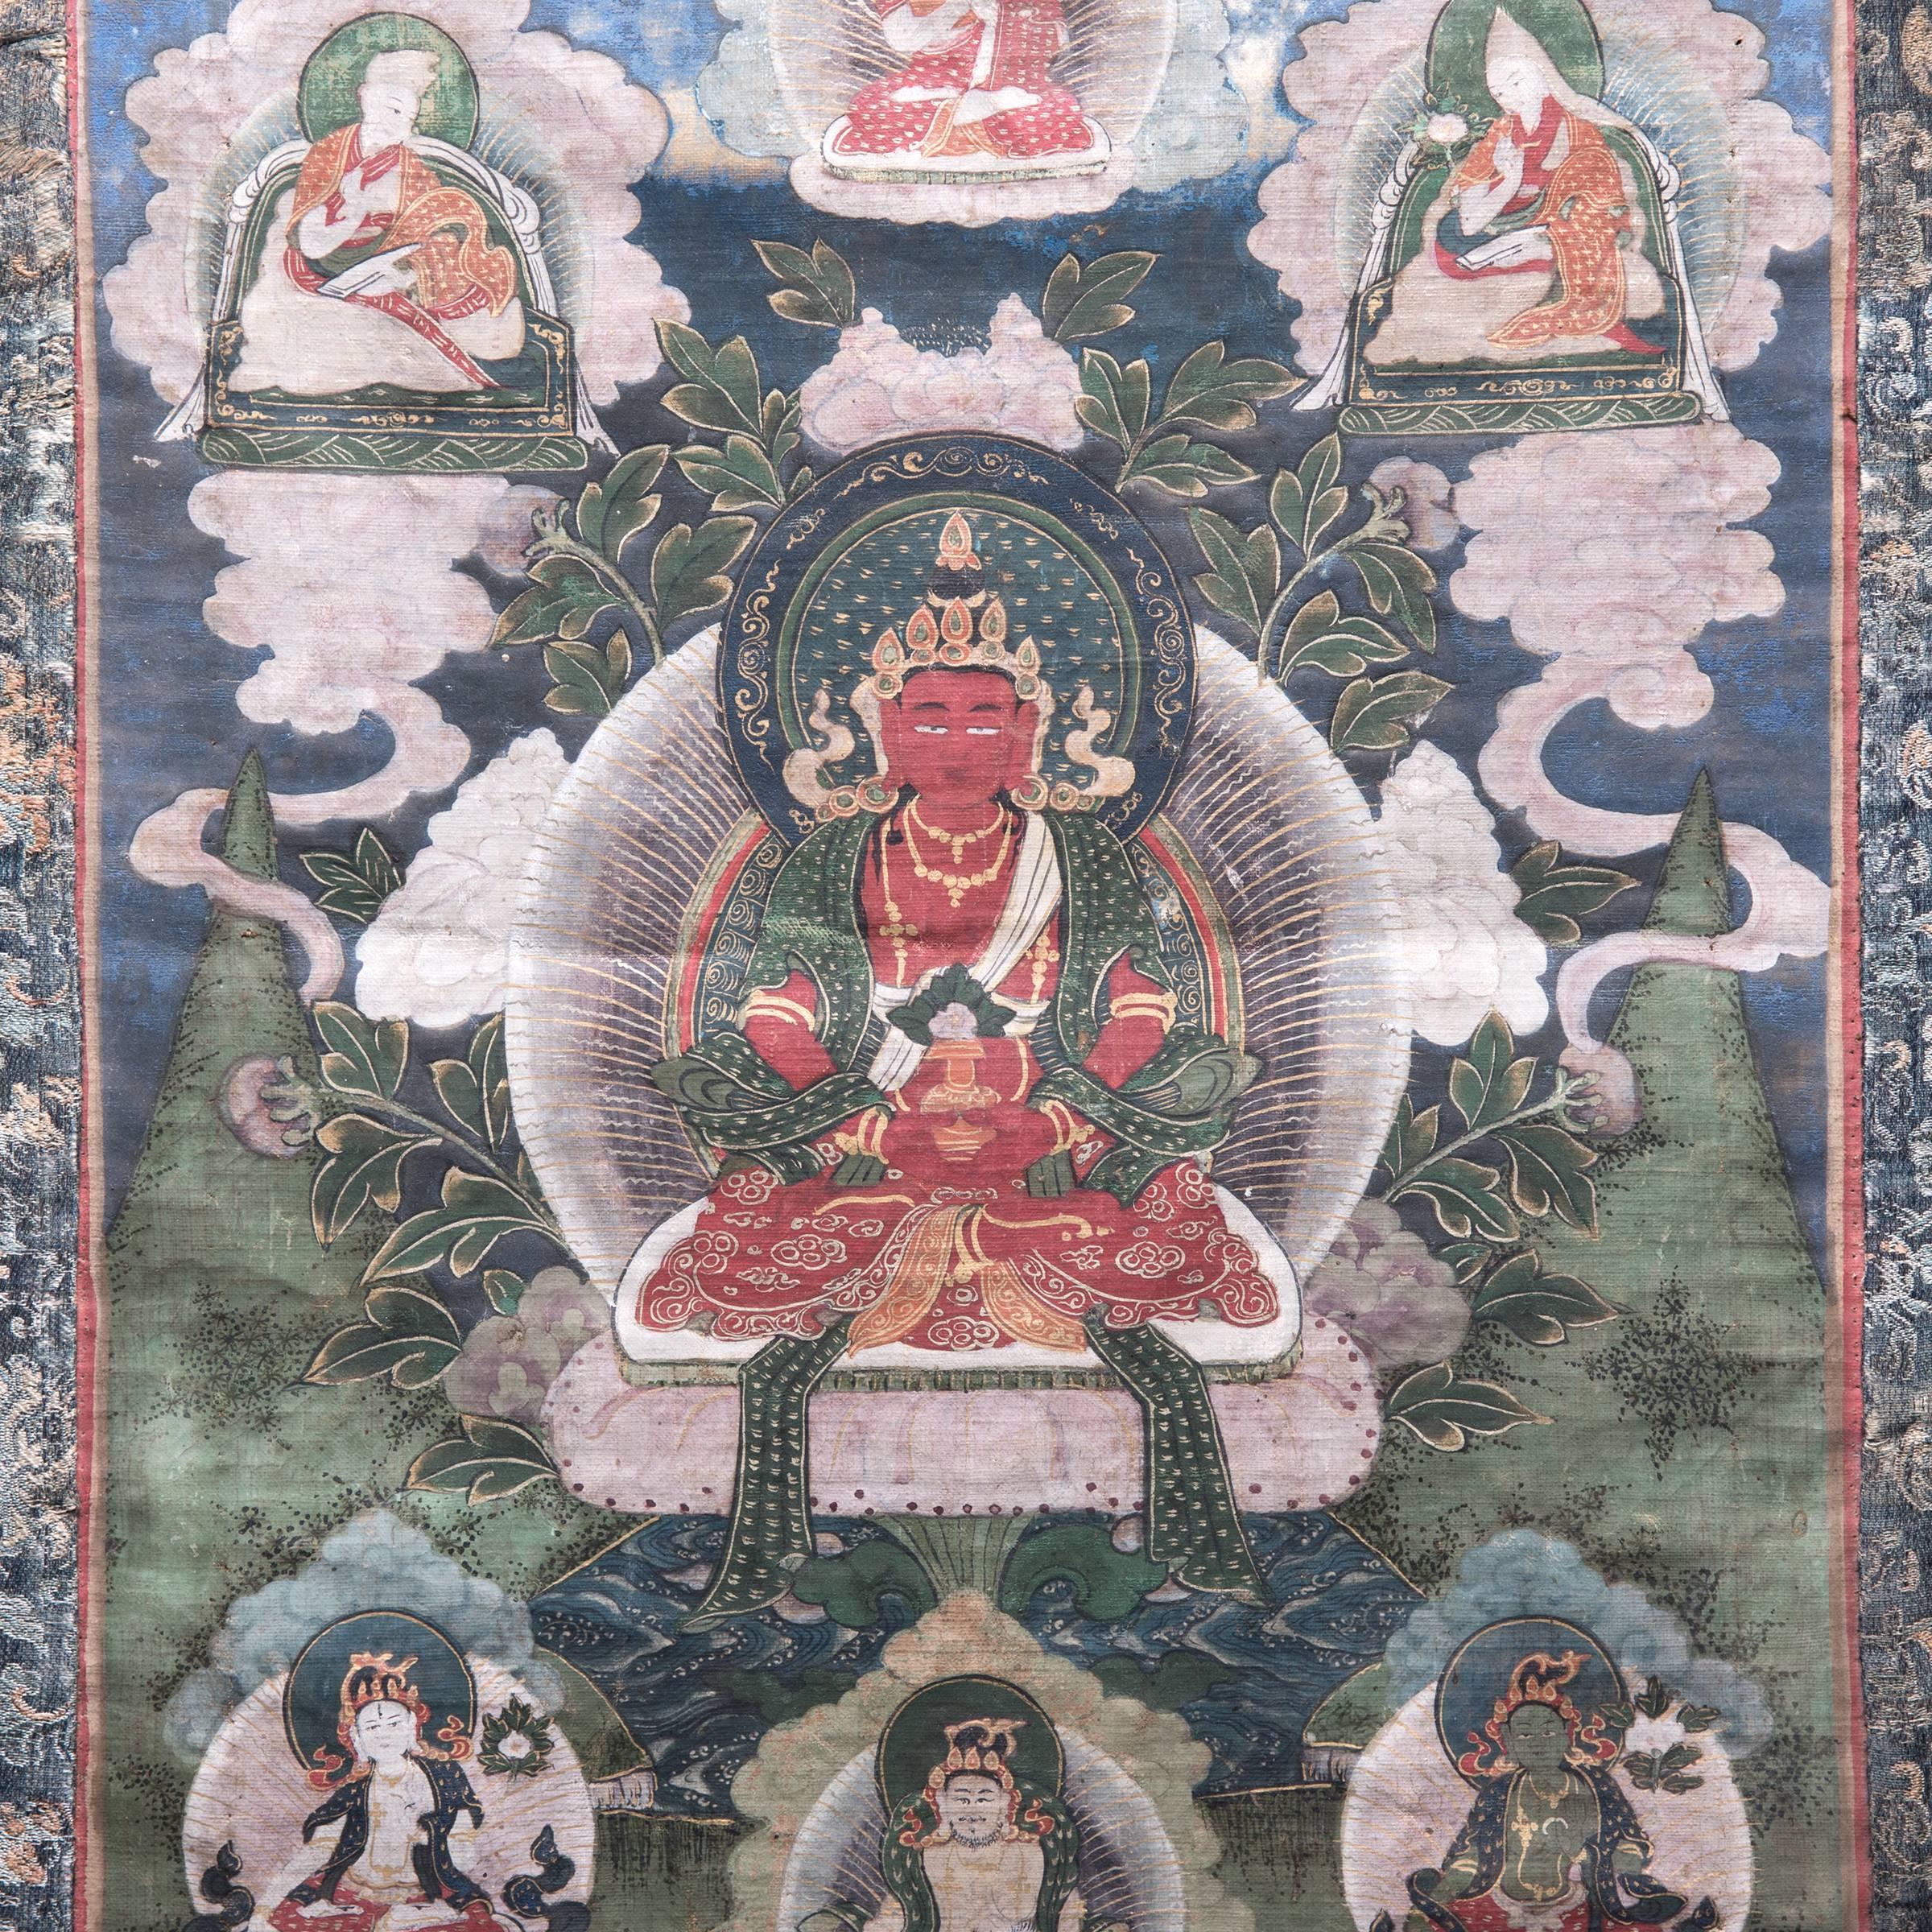 The followers of the cult of Amitayus, the Buddha of Eternal Life, believed that their devotion to this Buddha would prolong their lives. In this beautifully detailed Tibetan Thangka, the central figure of Amitayus is rendered in a brilliant shade